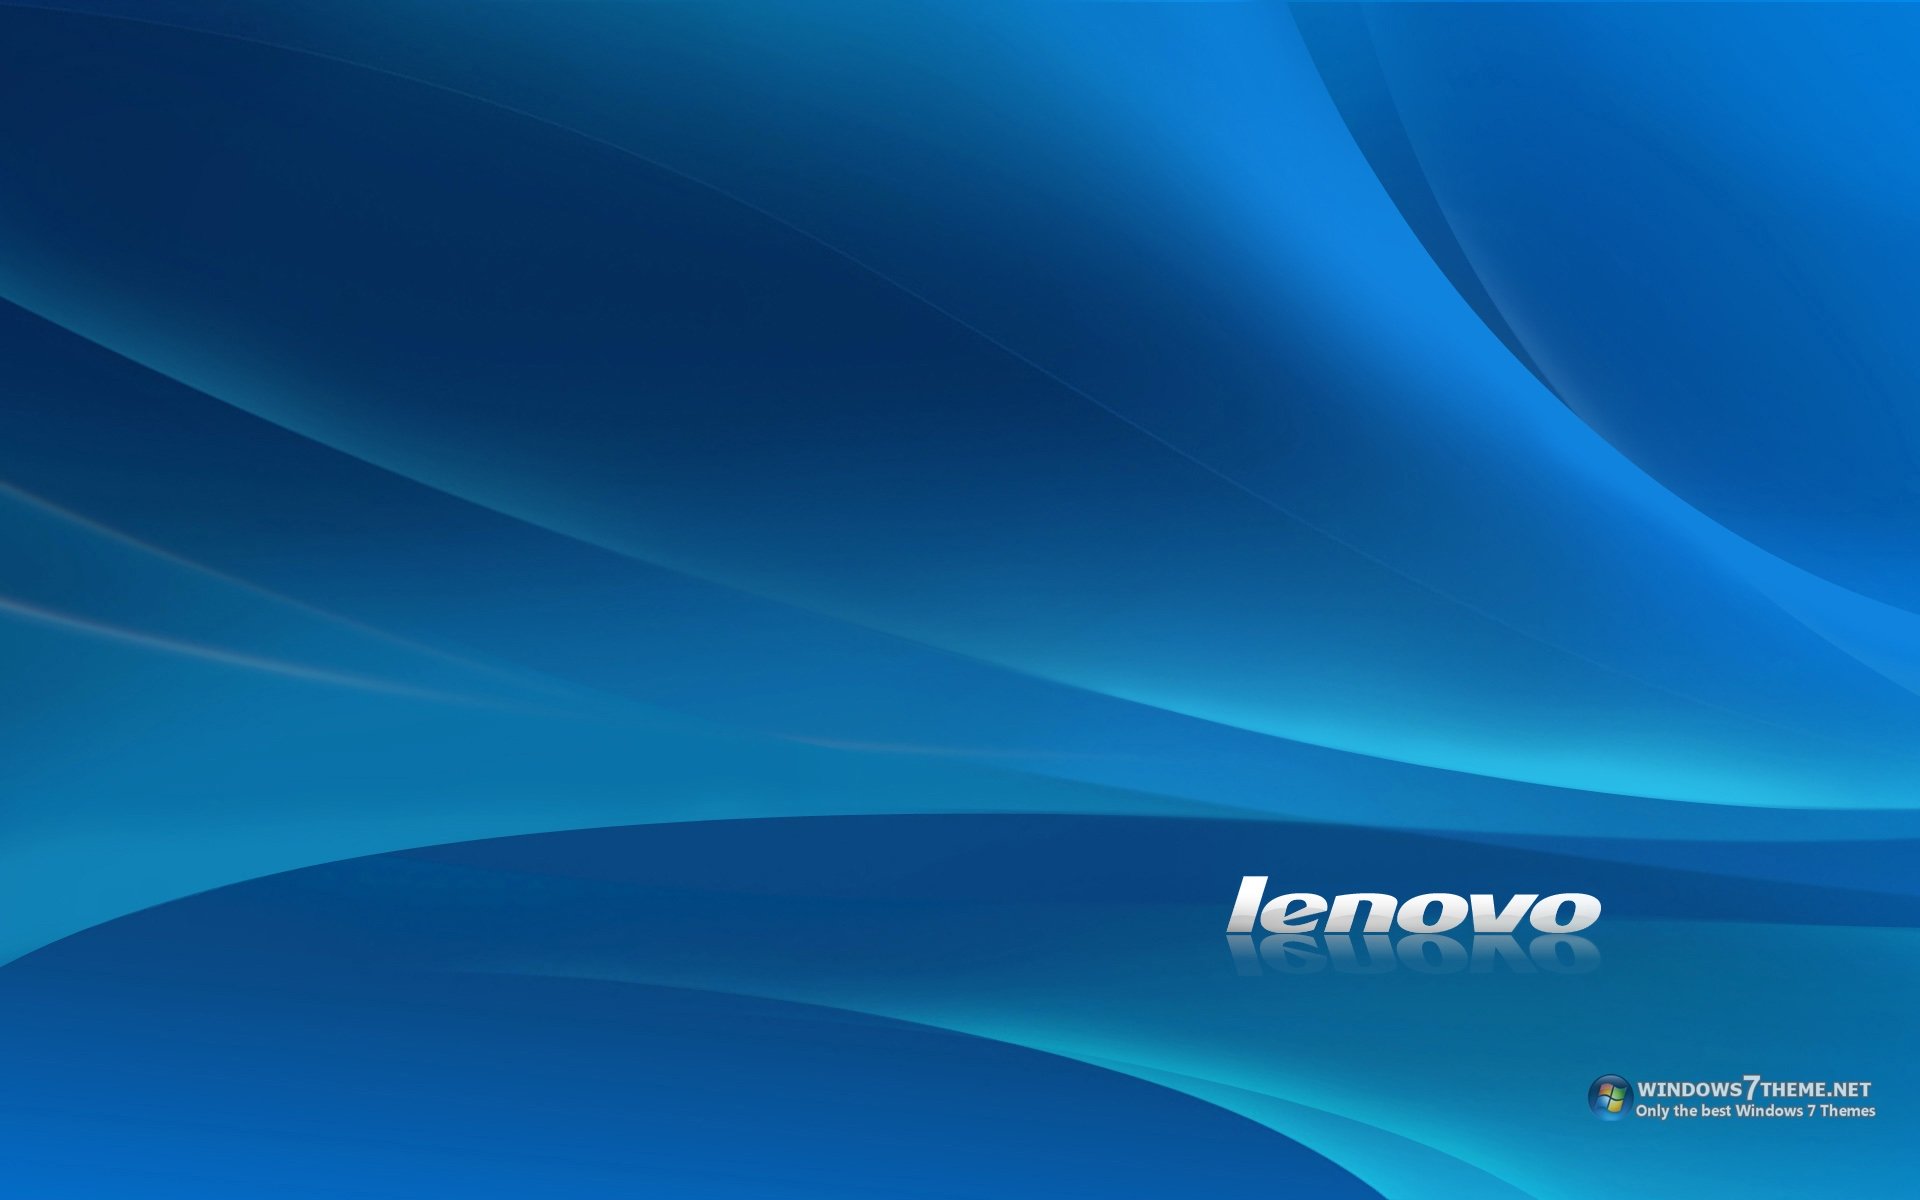 Lenovo Wallpaper Collection in HD for Download 1920x1200